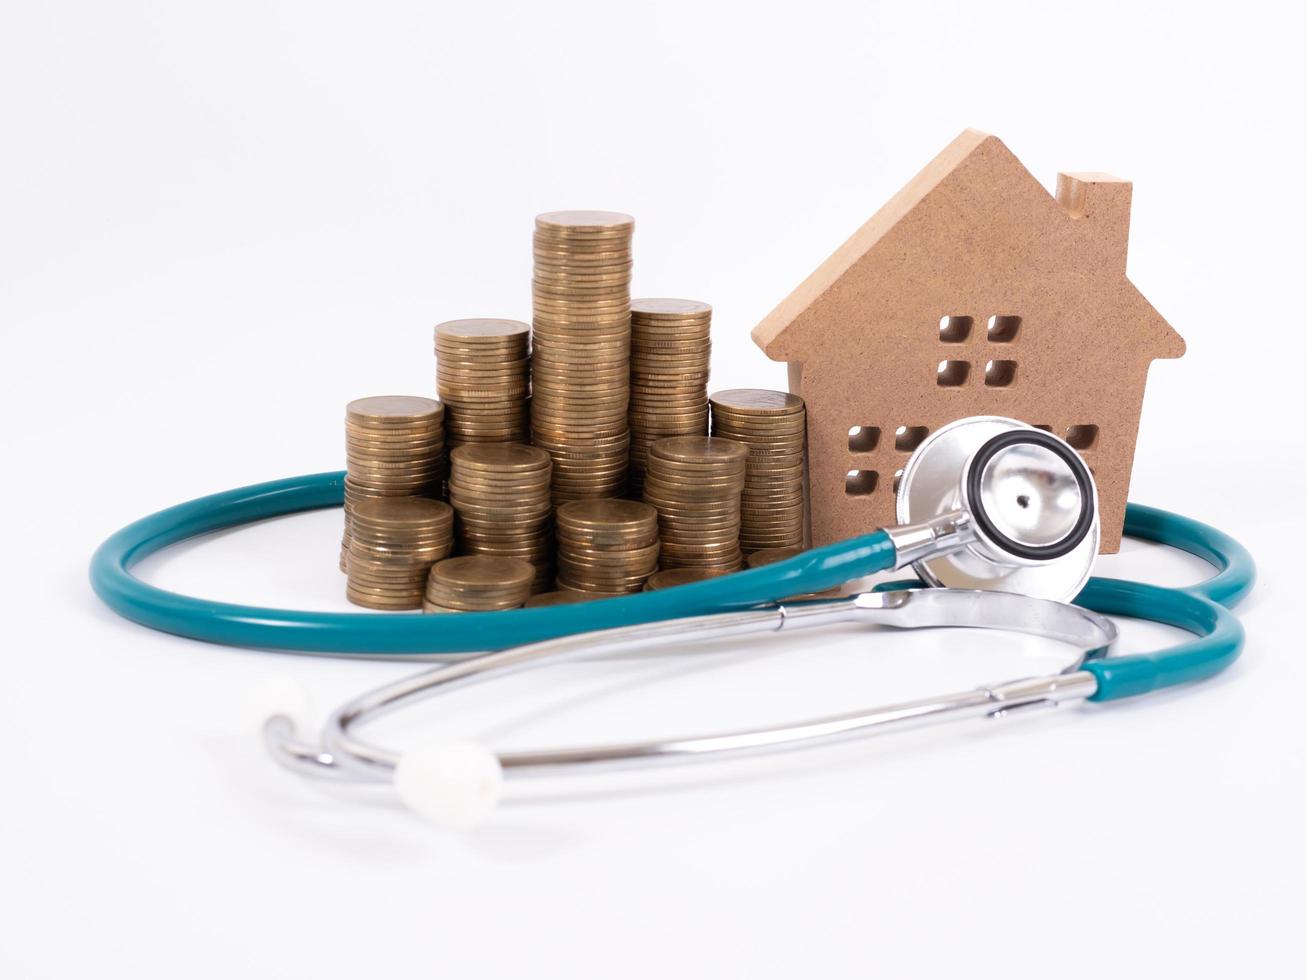 Check up house and investment concept. Stethoscope with miniature house and money photo